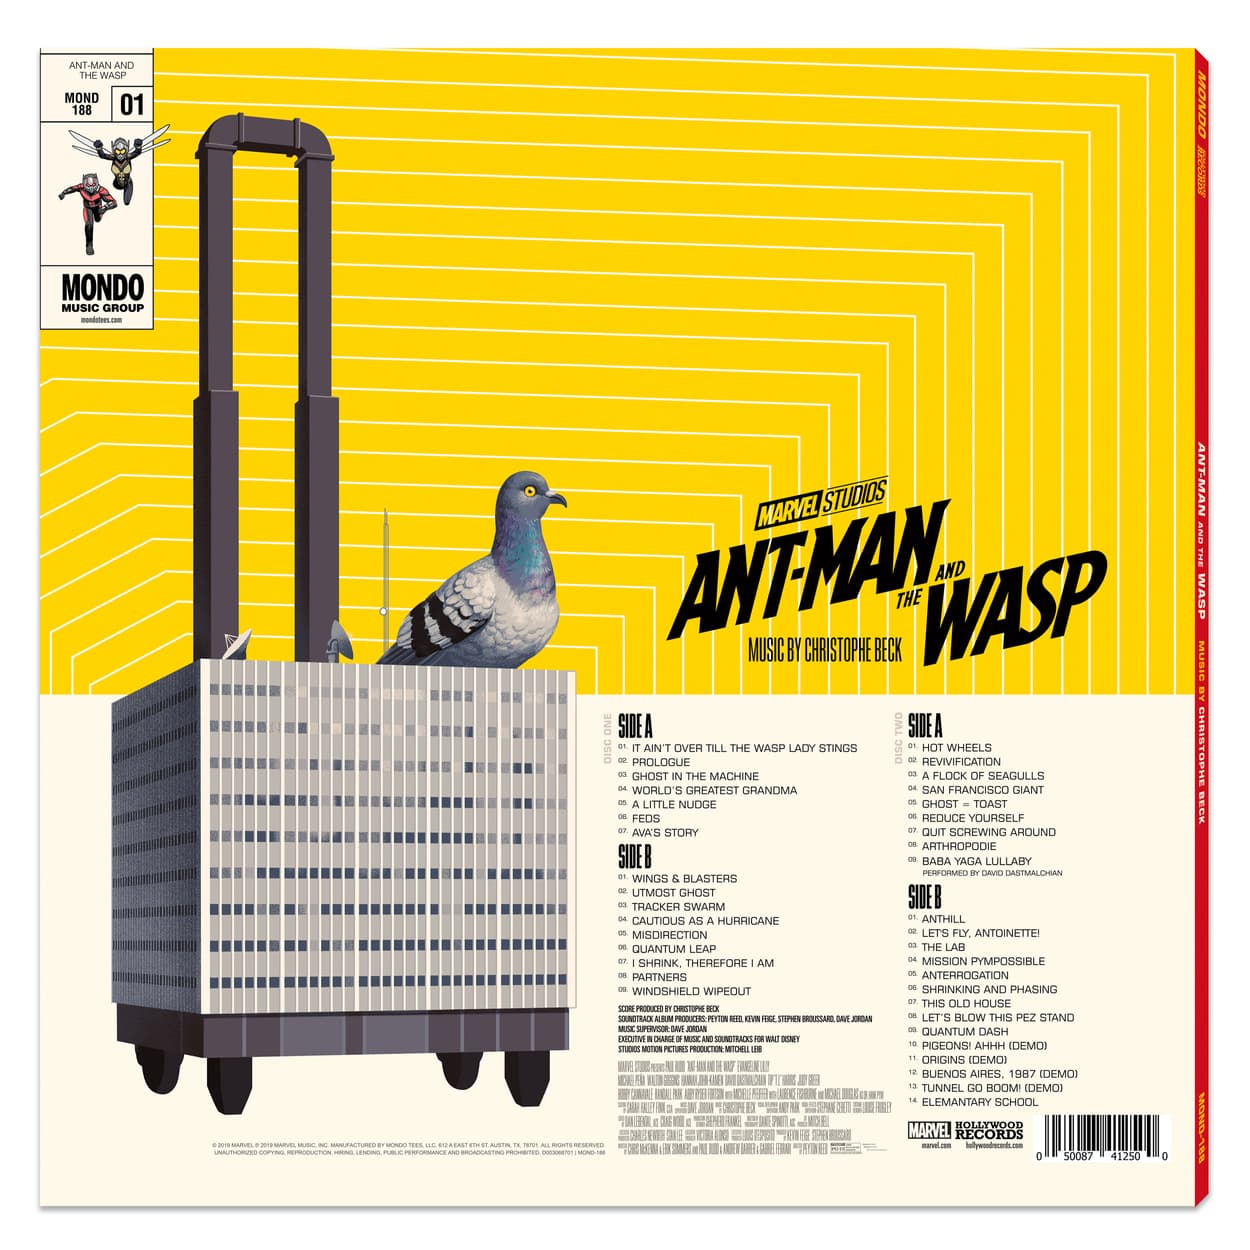 Ant-Man and the Wasp back cover